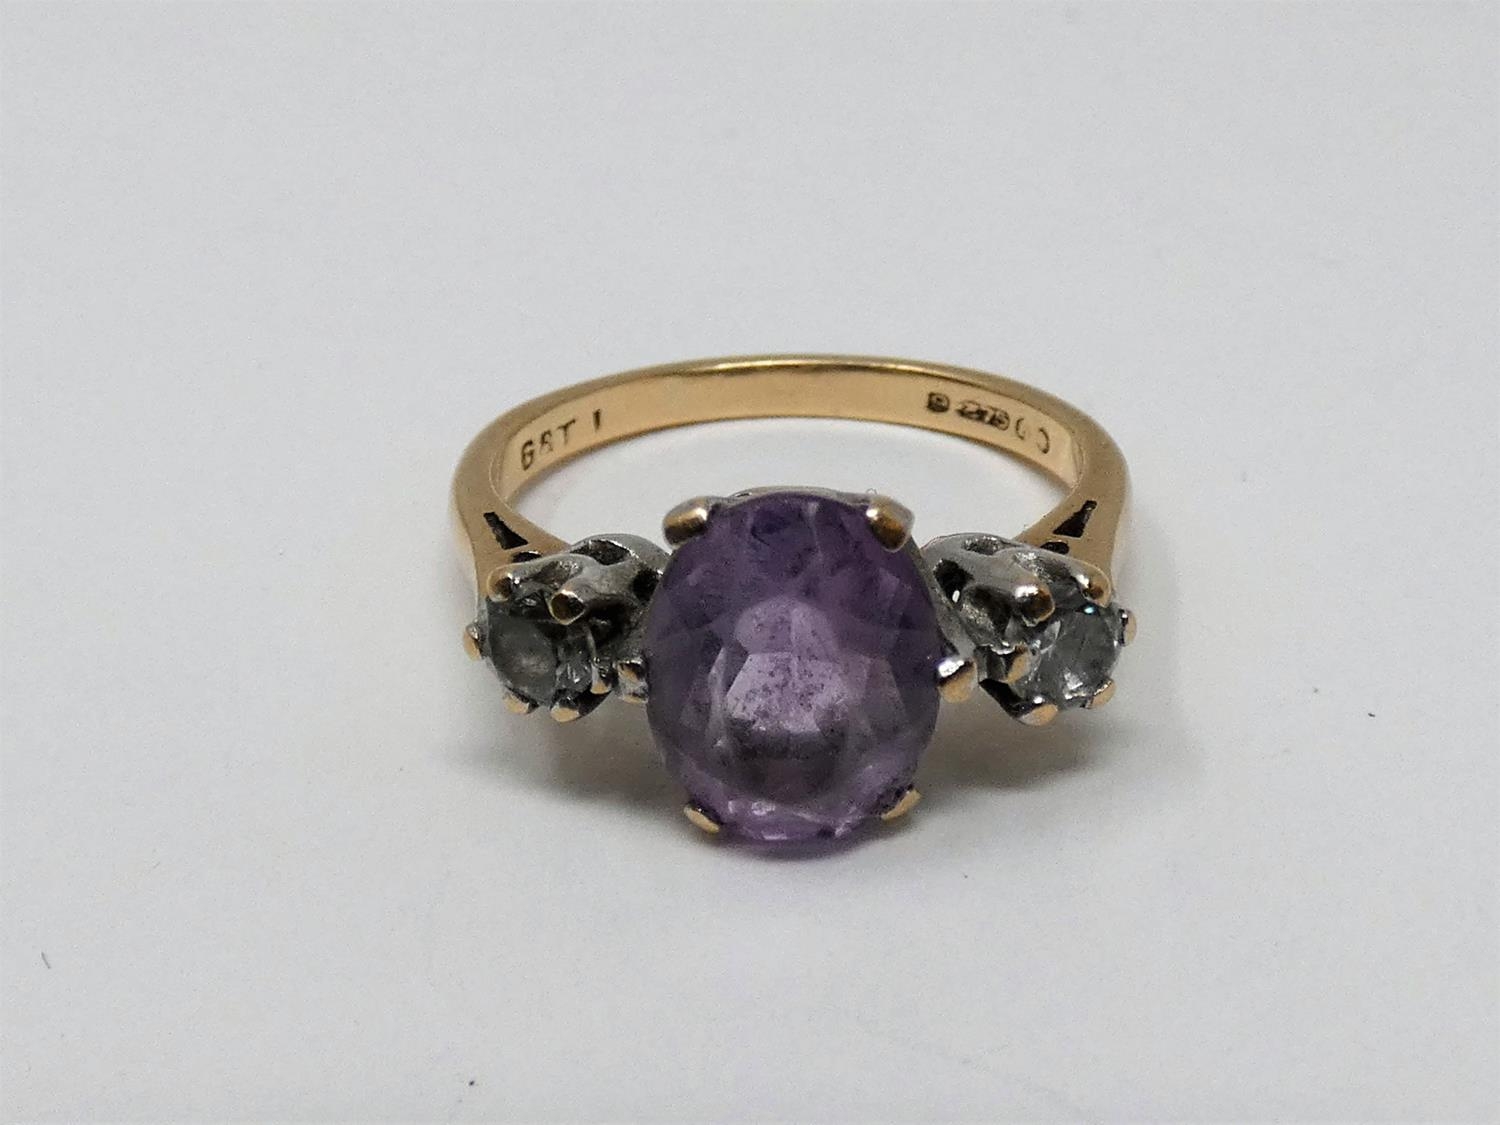 A 9ct yellow gold and white metal three stone ring, set with purple and white paste stones. Shank